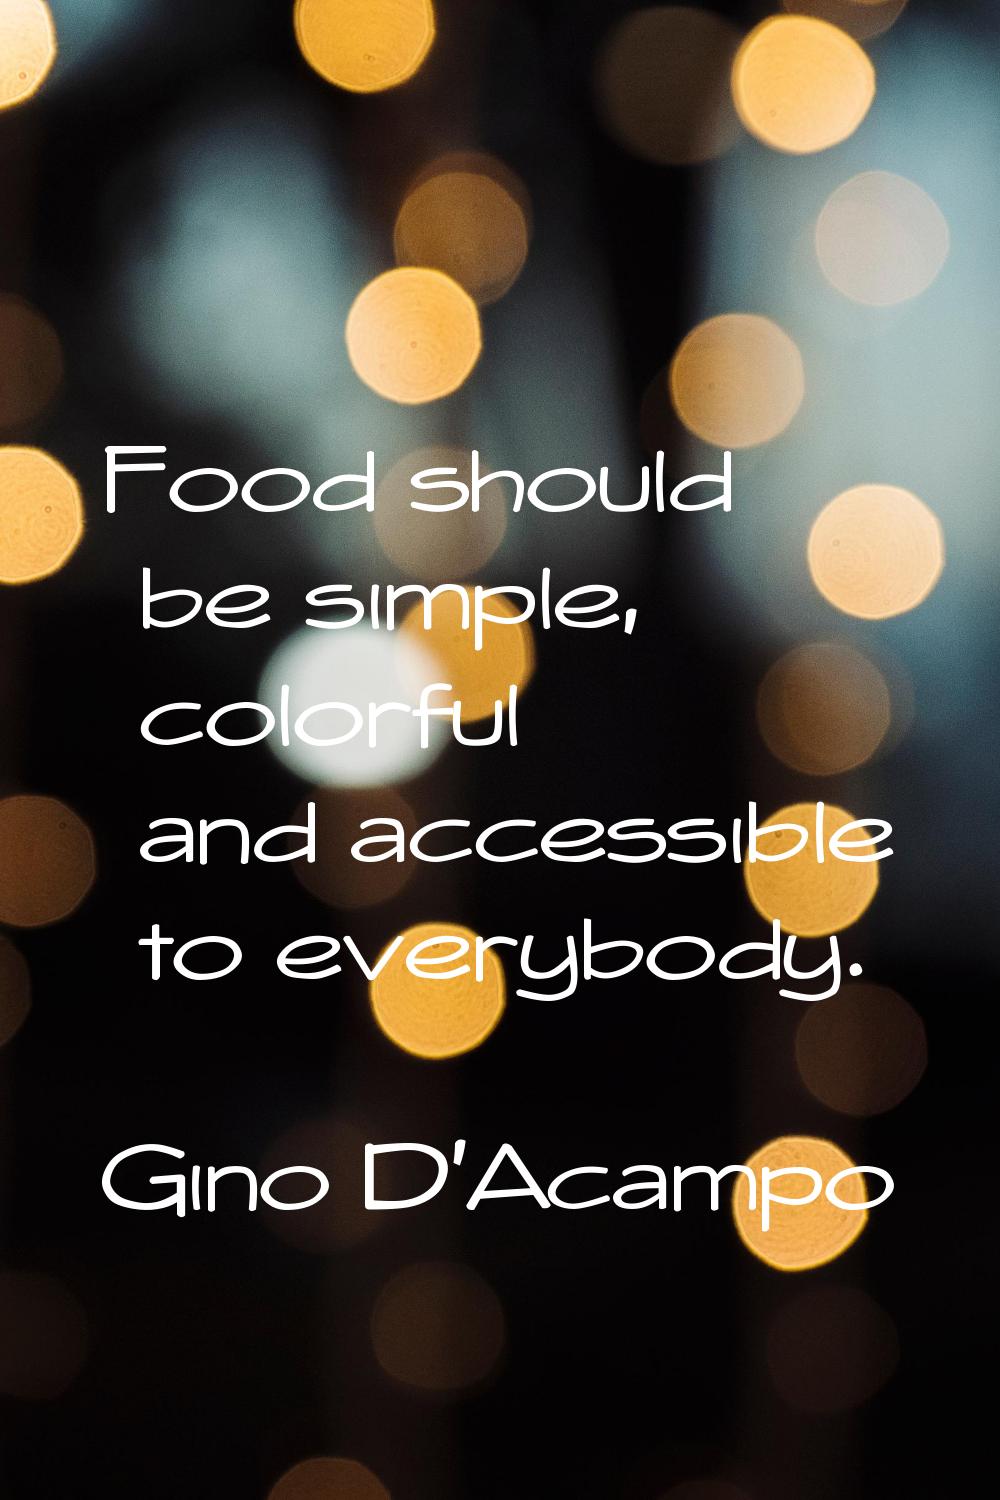 Food should be simple, colorful and accessible to everybody.